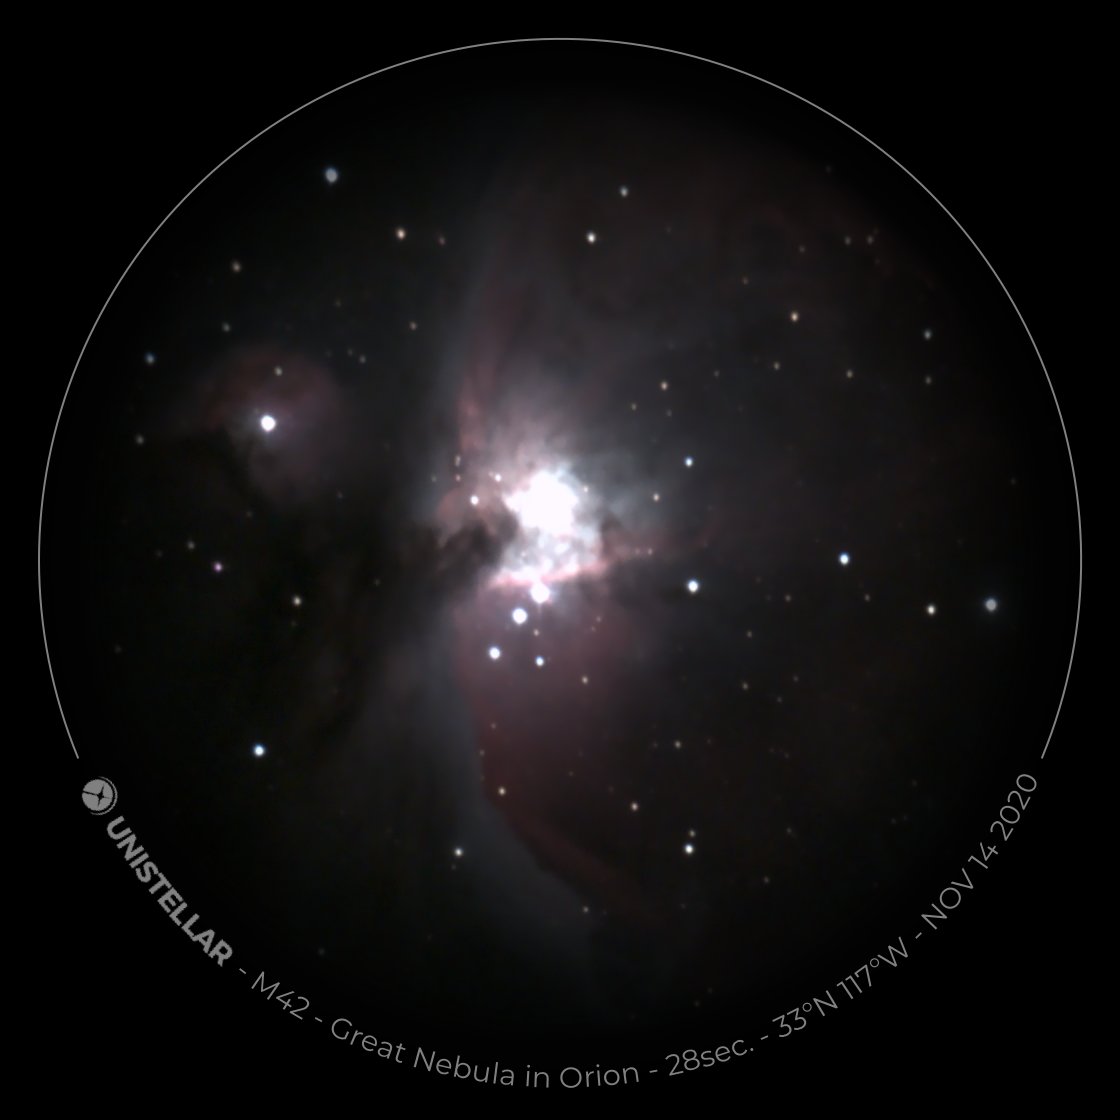 The real highlight of my first night with the  #eVscope was looking at M42, the Orion Nebula. This view was just 28 seconds. I've seen M42 in many, some huge telescopes. This view made me call out with excitement. The "eyepiece" view was stunning and would be epic at star parties.